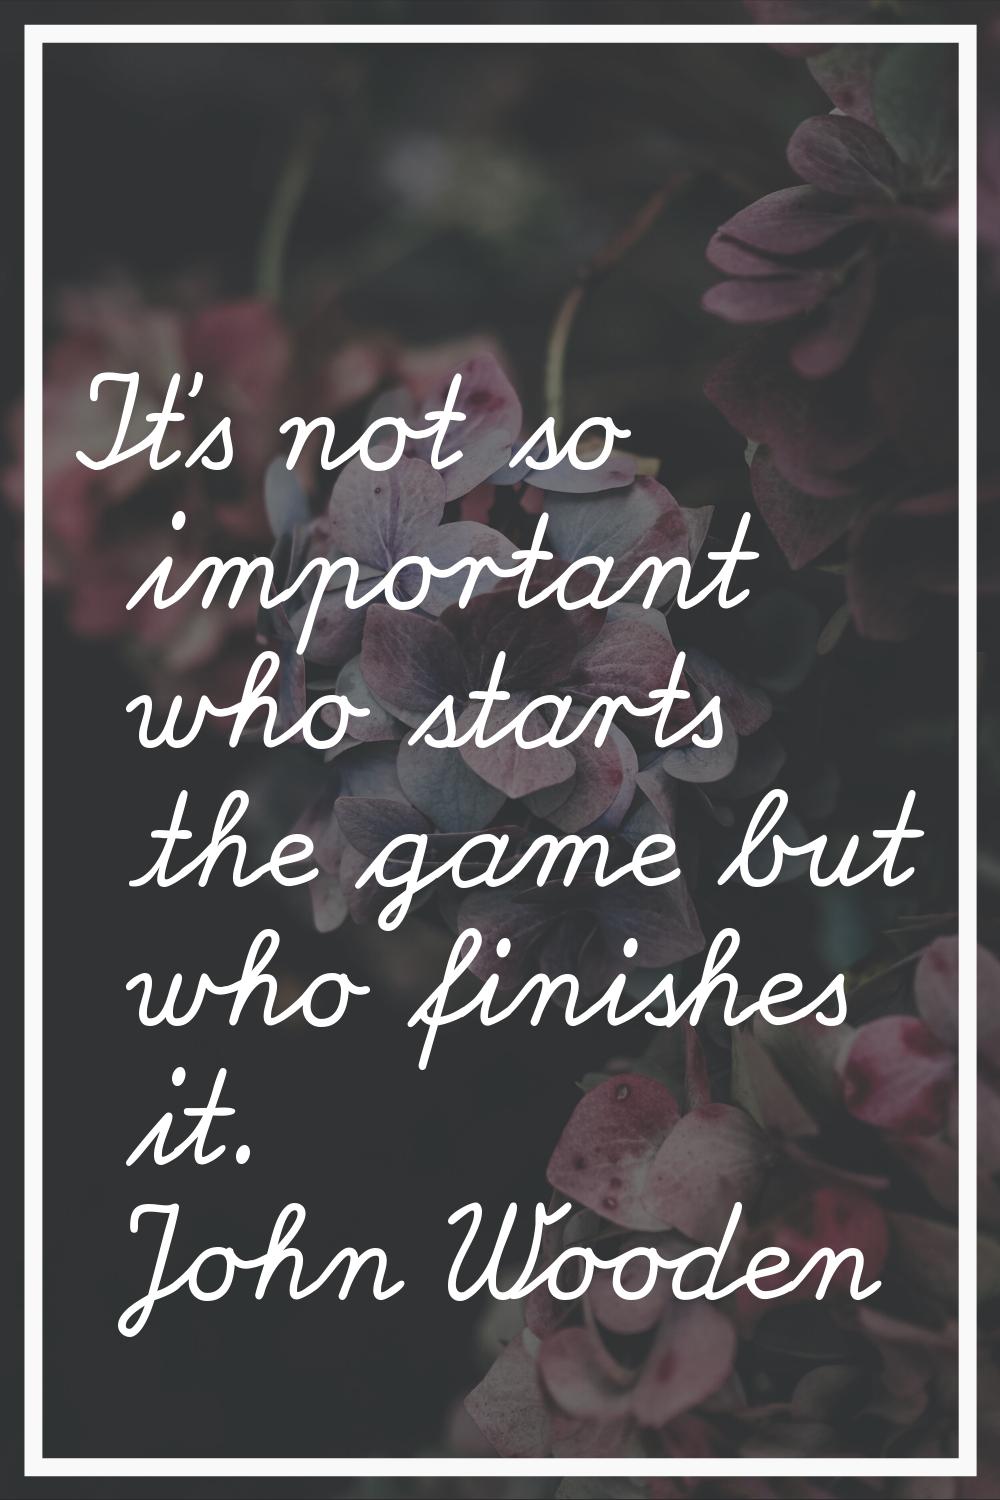 It's not so important who starts the game but who finishes it.